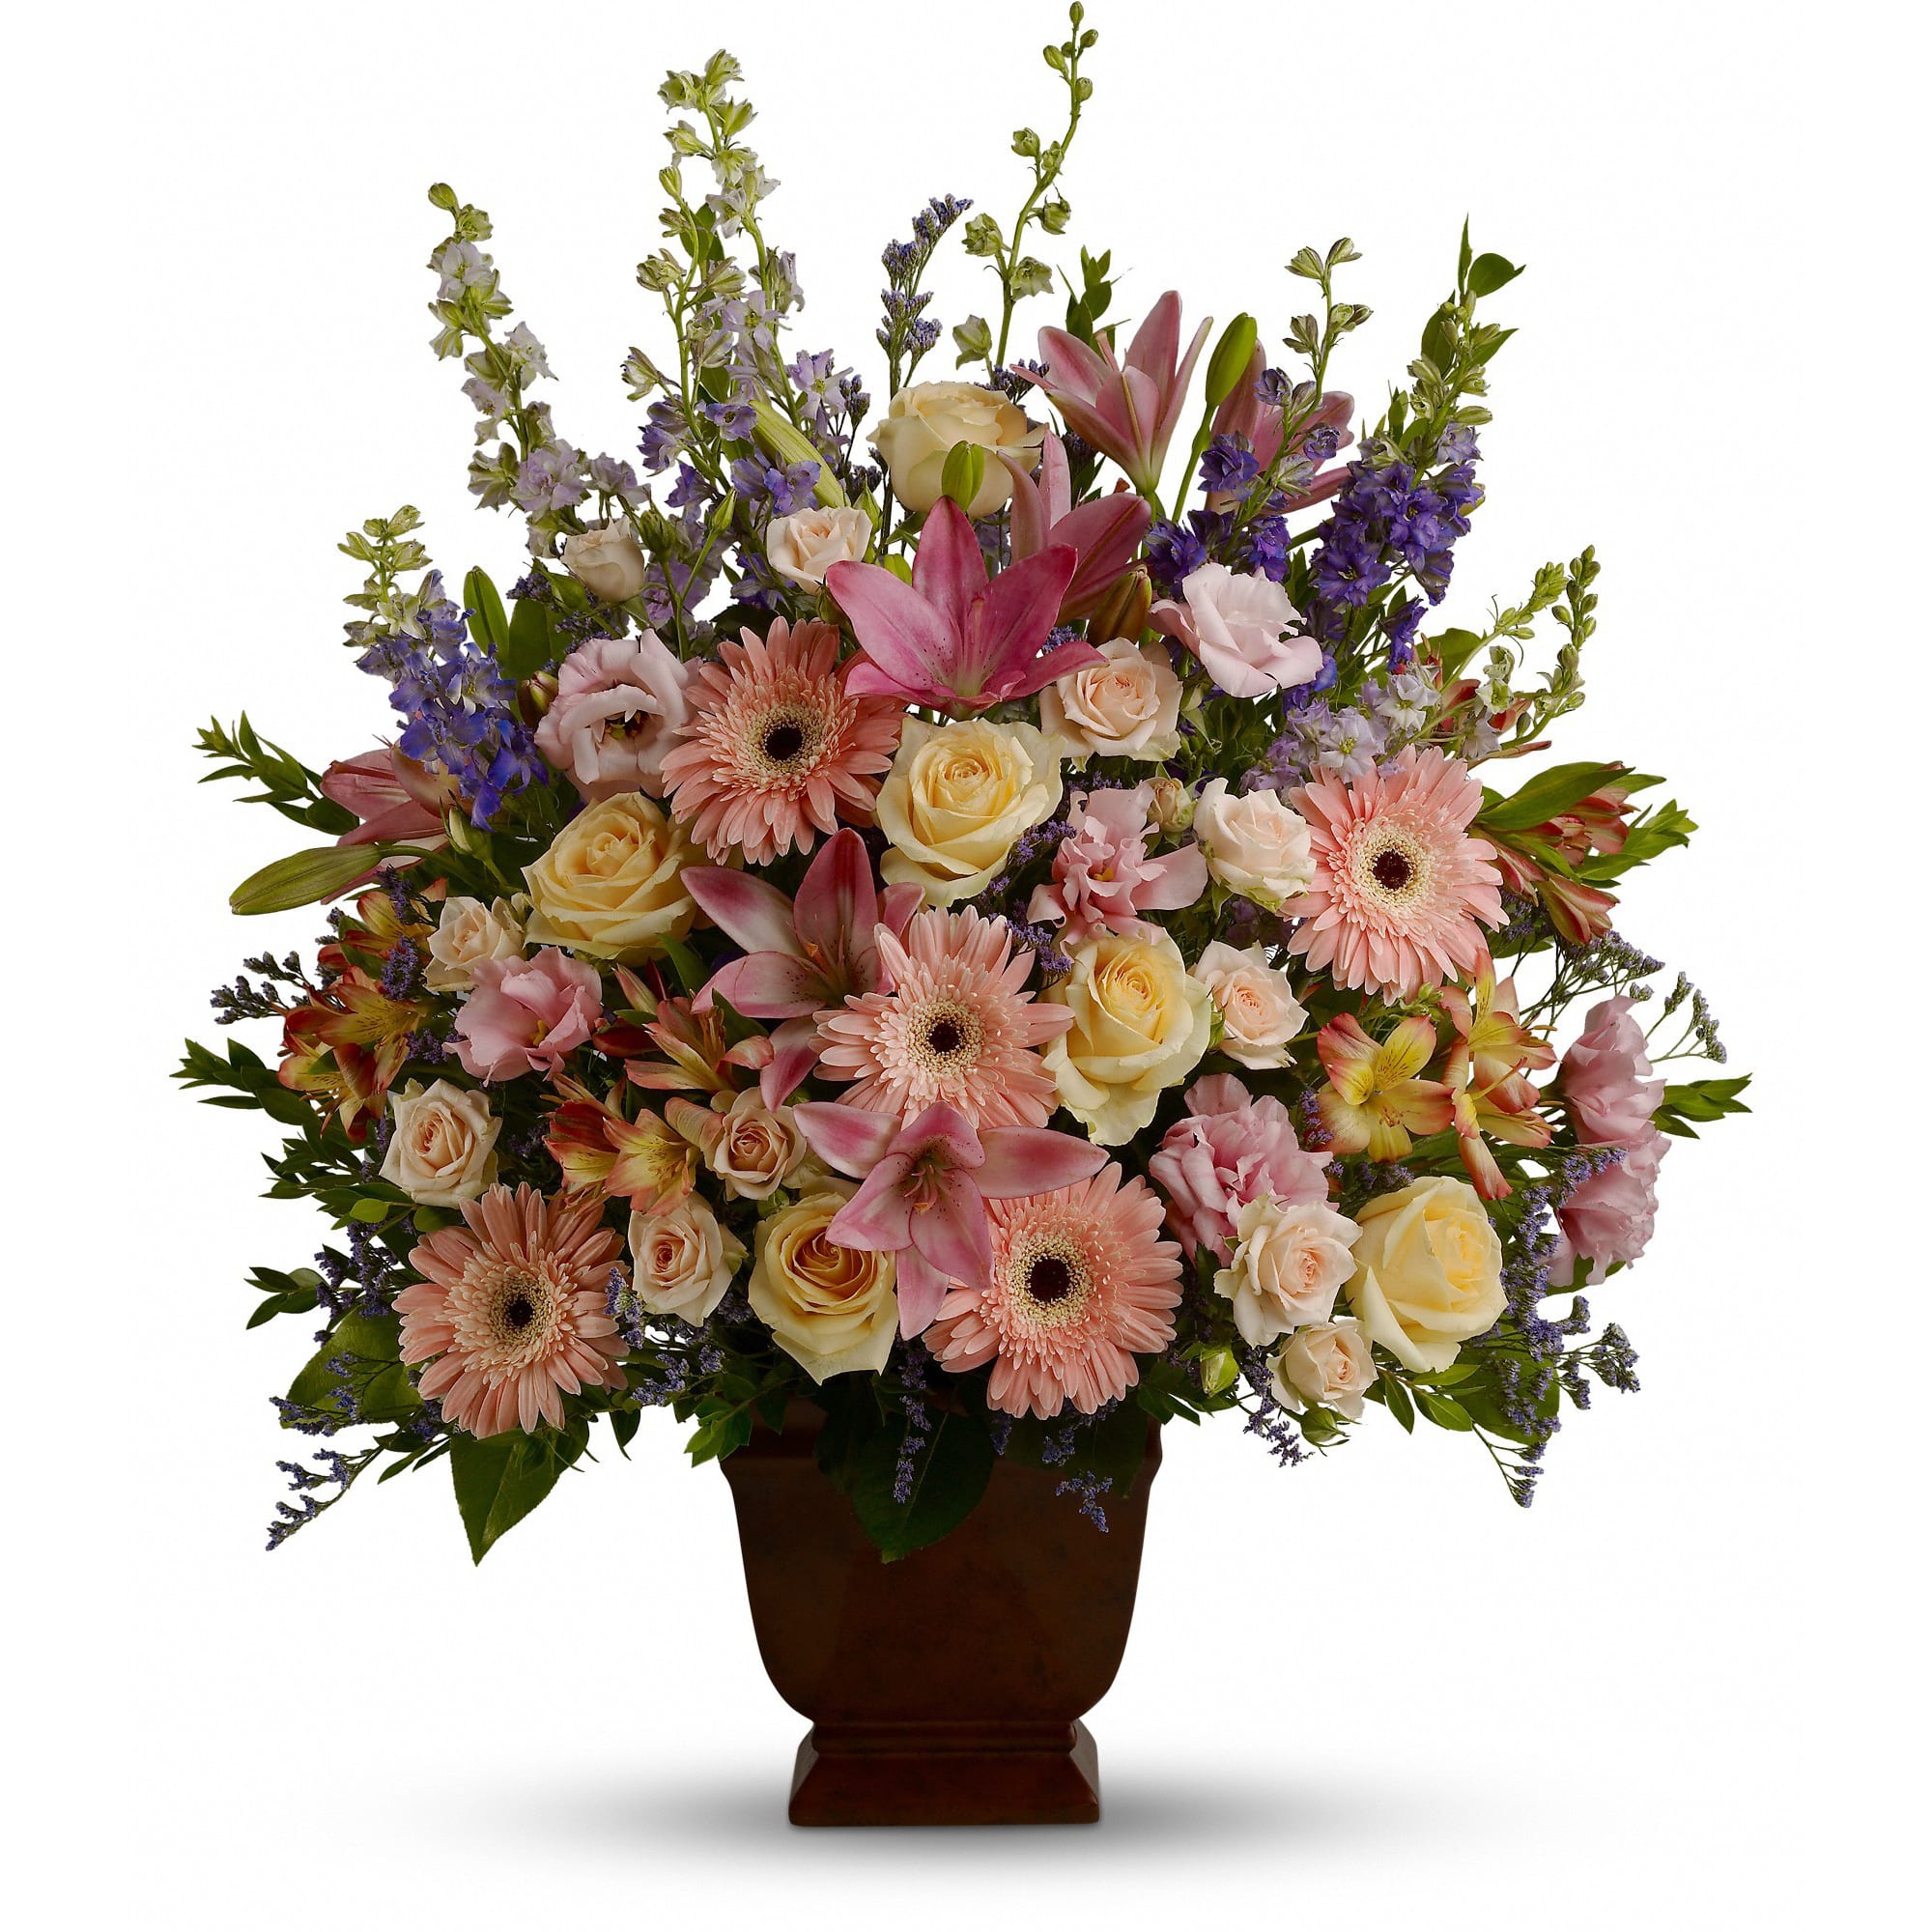  Loving Grace - A warm and peaceful bounty of pastel blossoms gently expresses love and respect. A gracefully composed arrangement appropriate for home or service. 